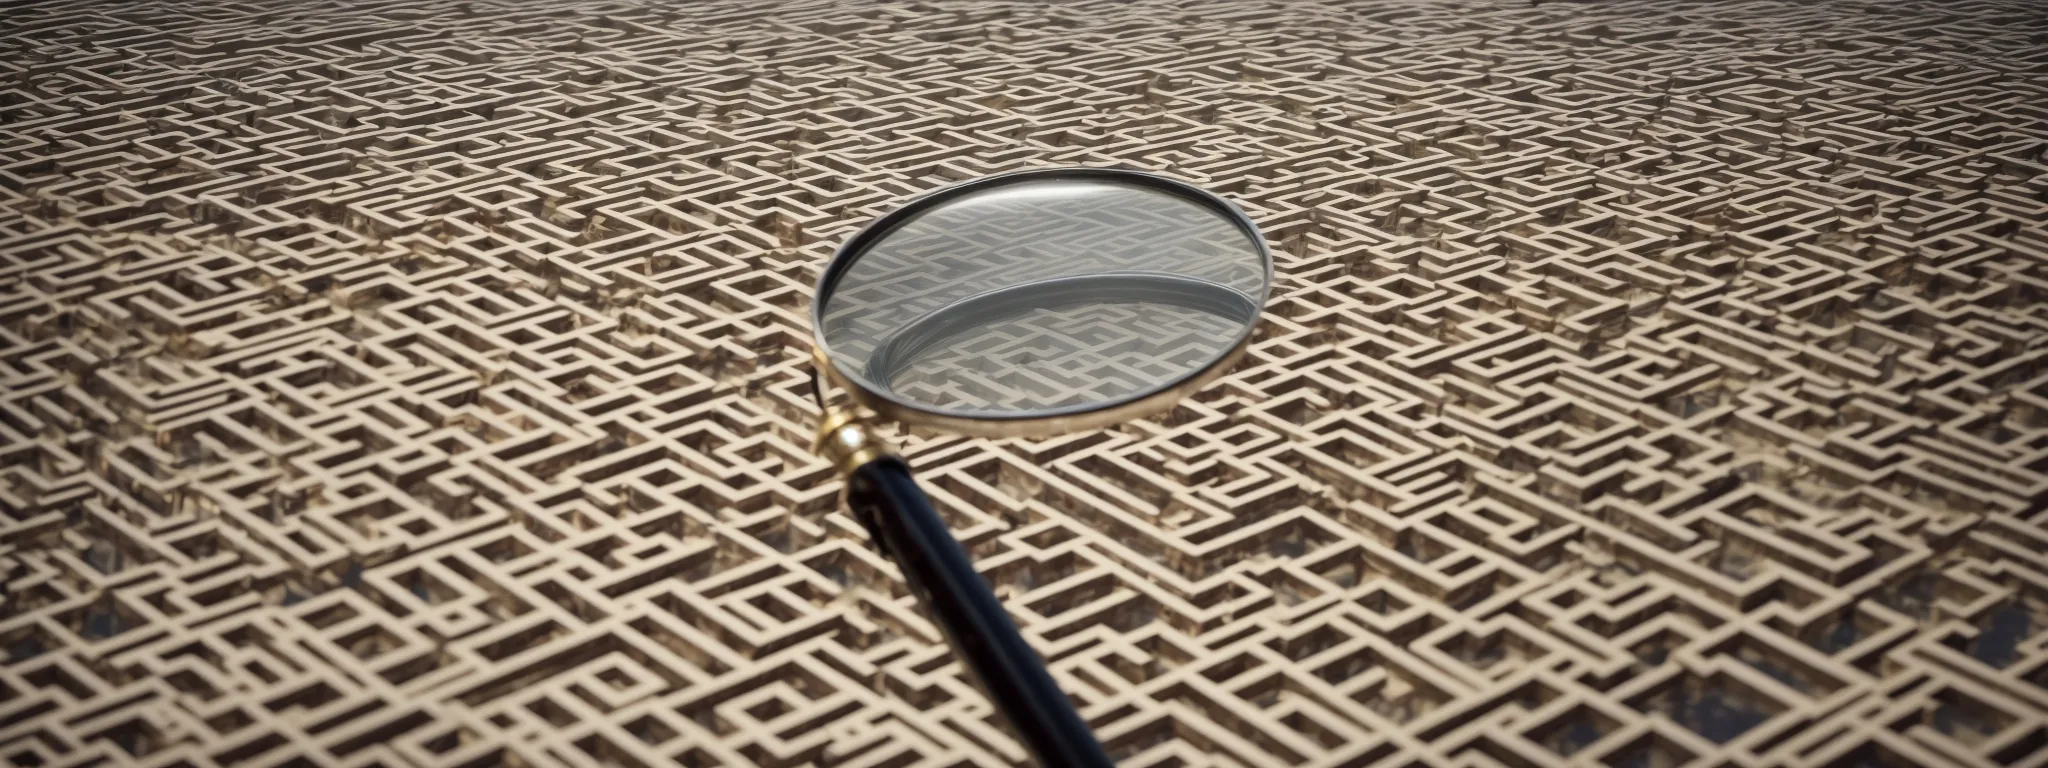 a maze of web pages with a magnifying glass focusing on a single, highlighted page.